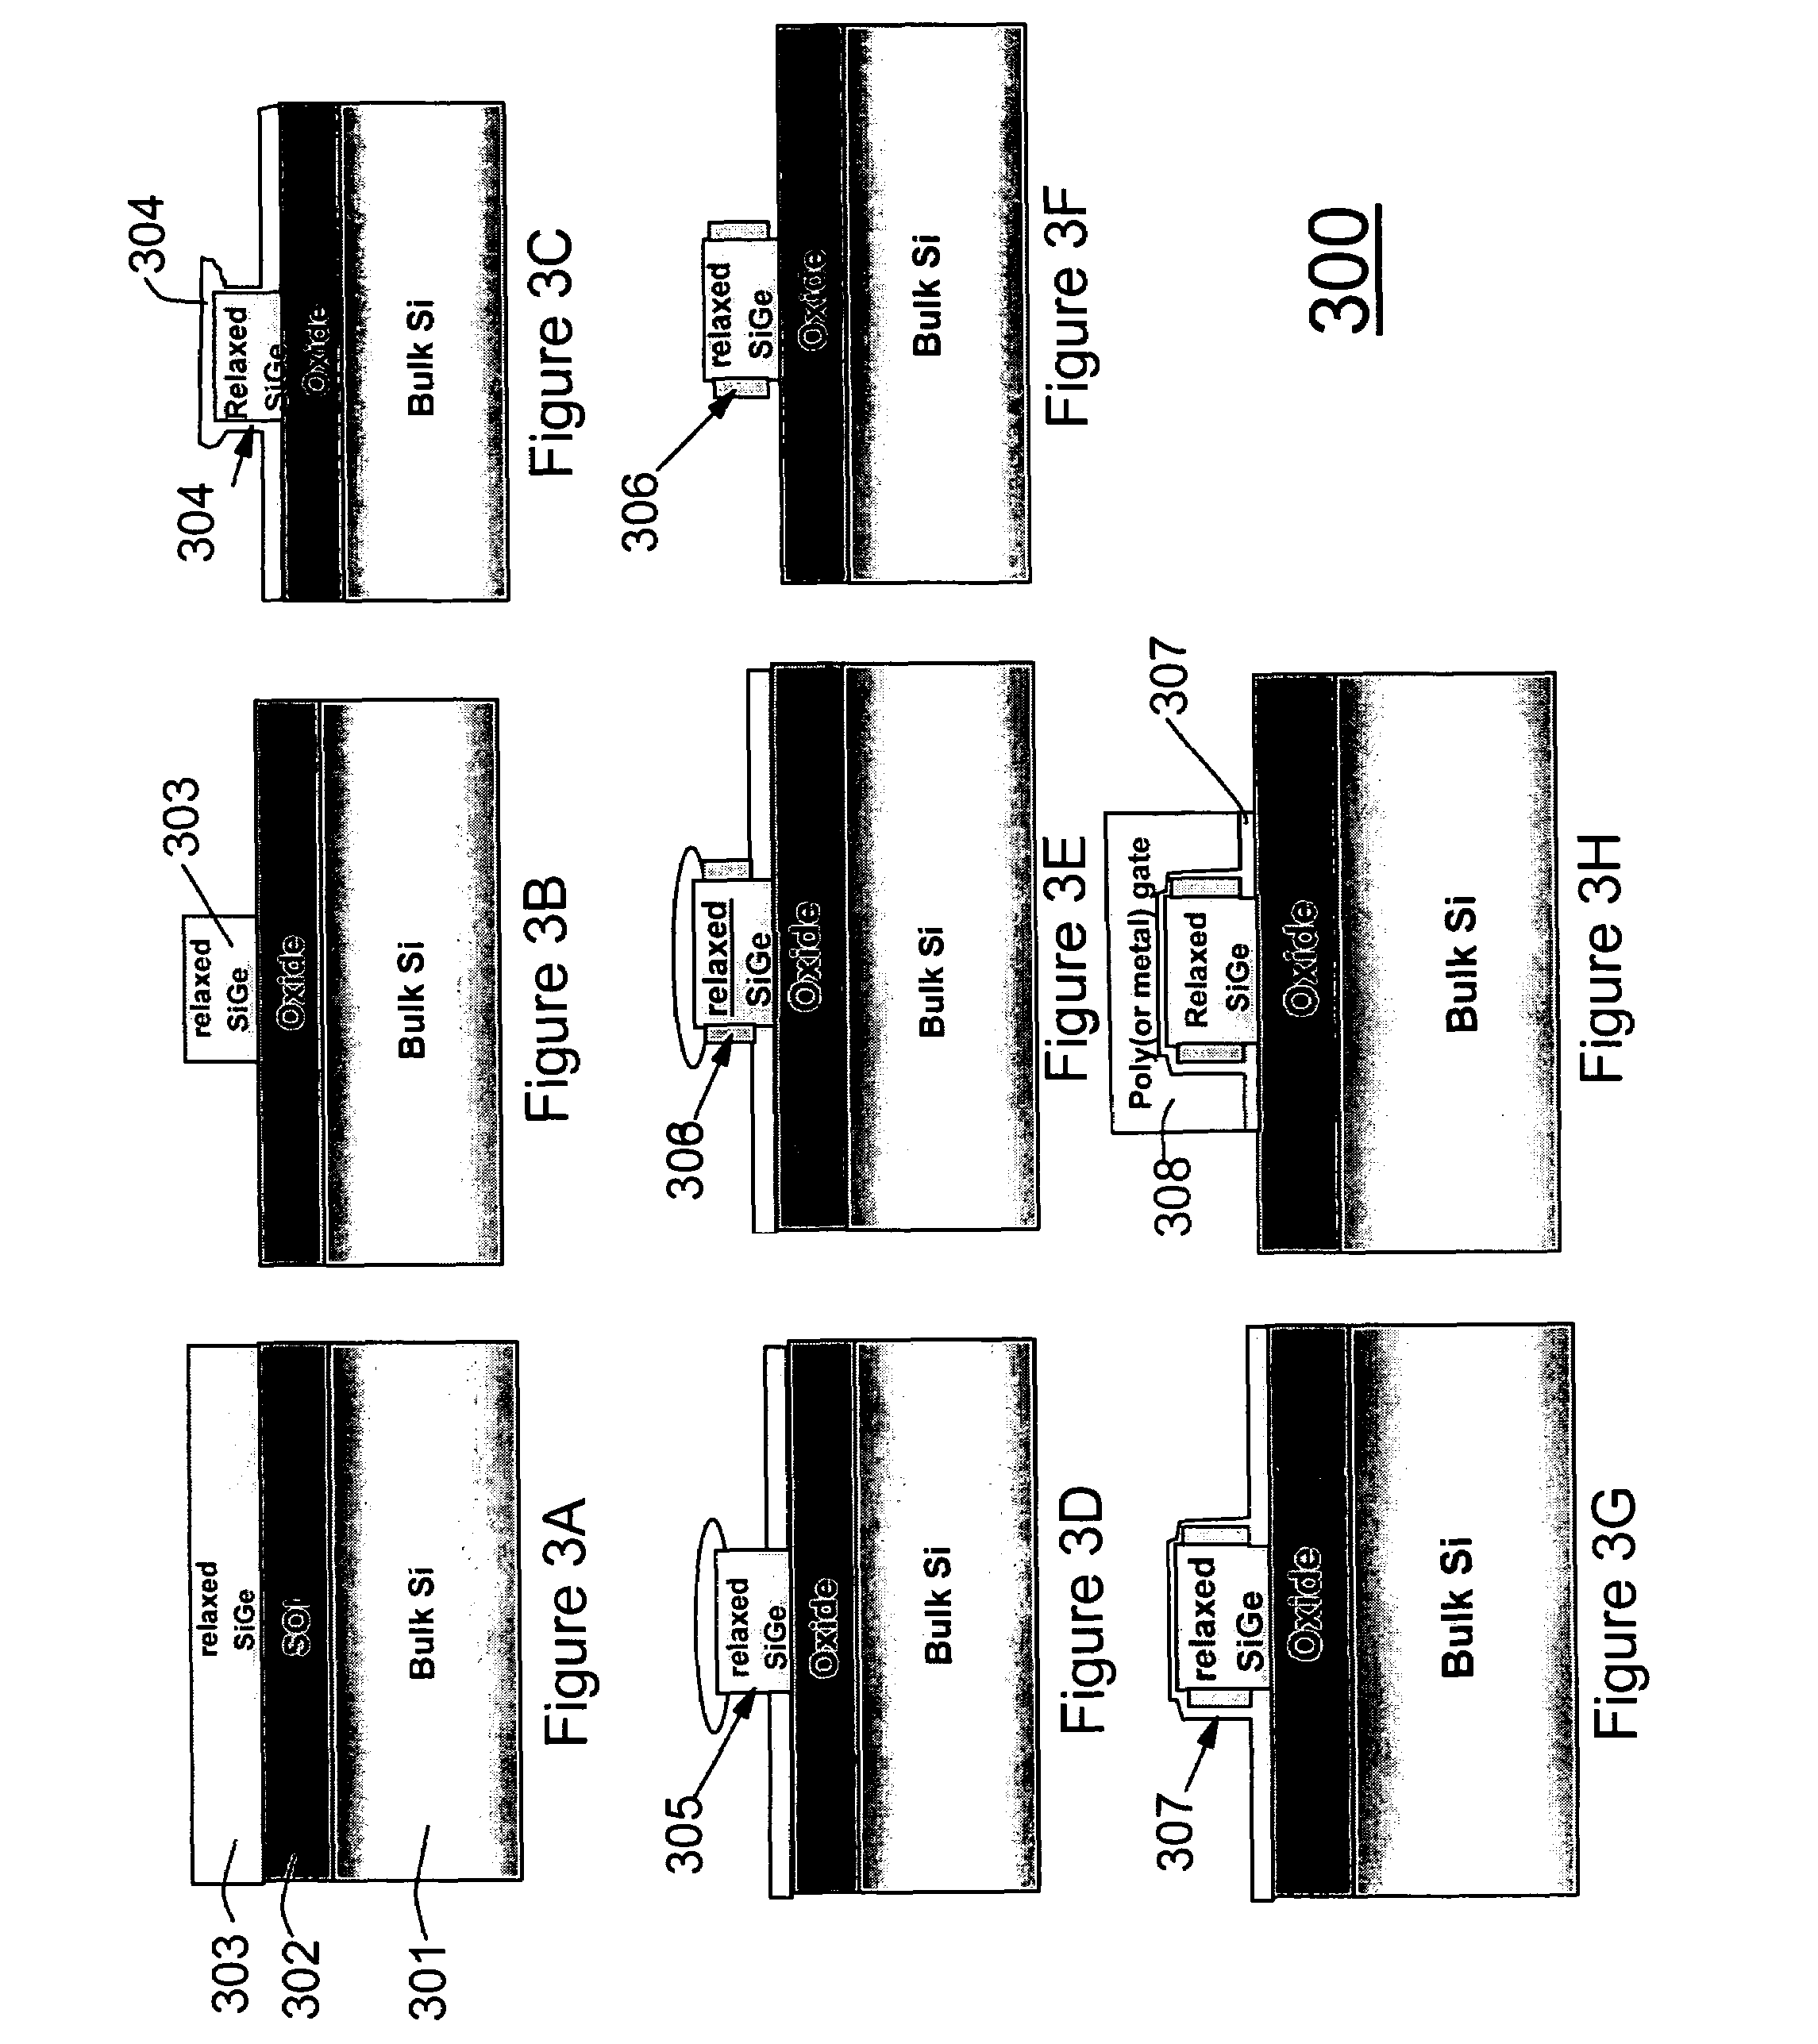 High performance strained silicon FinFETs device and method for forming same